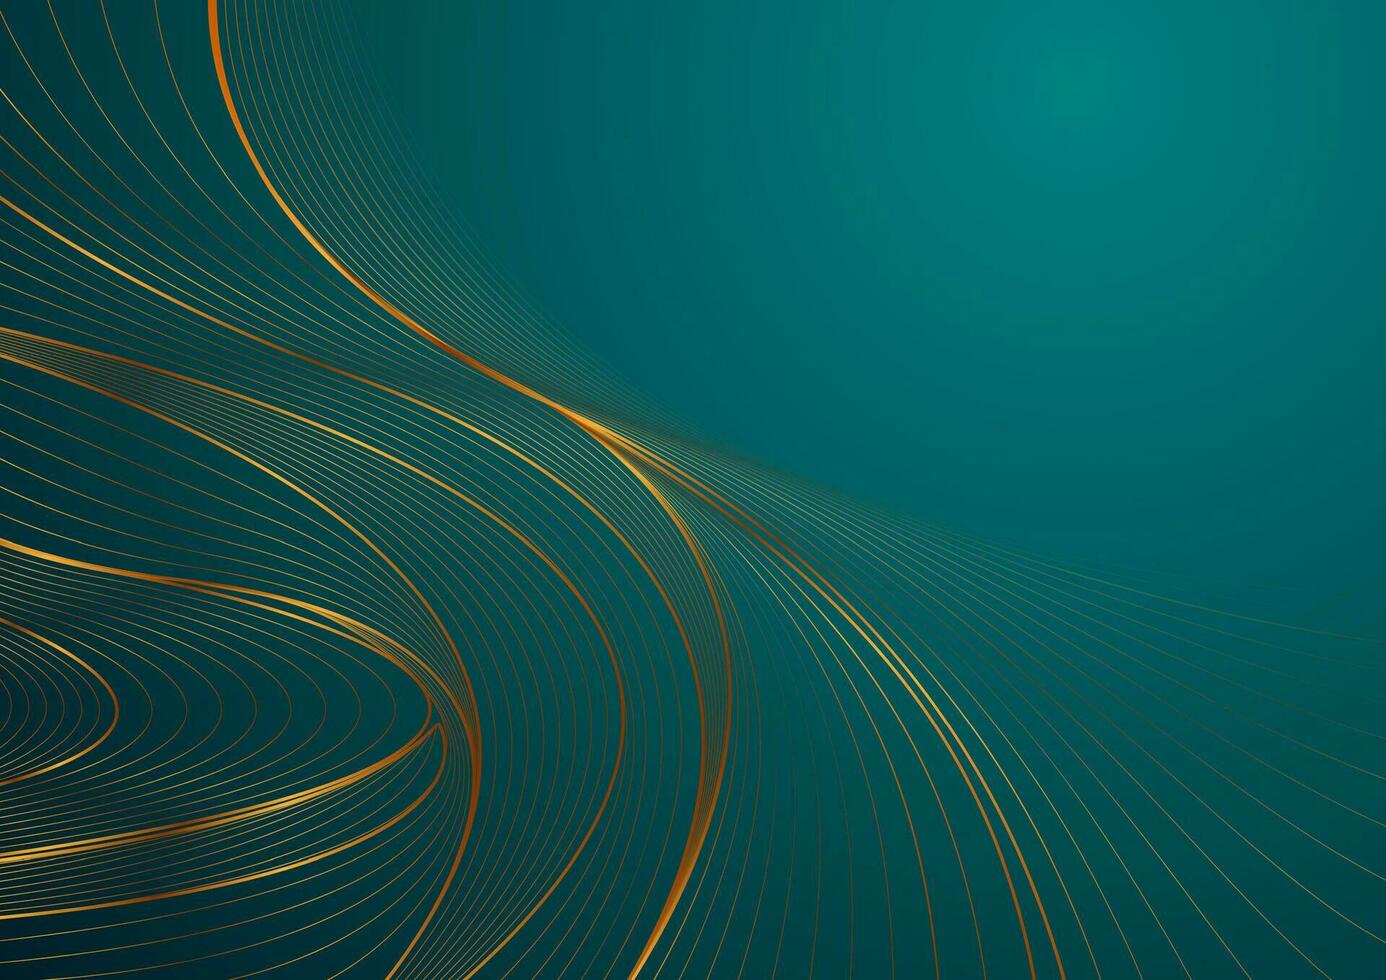 Turquoise abstract background with golden wavy pattern vector